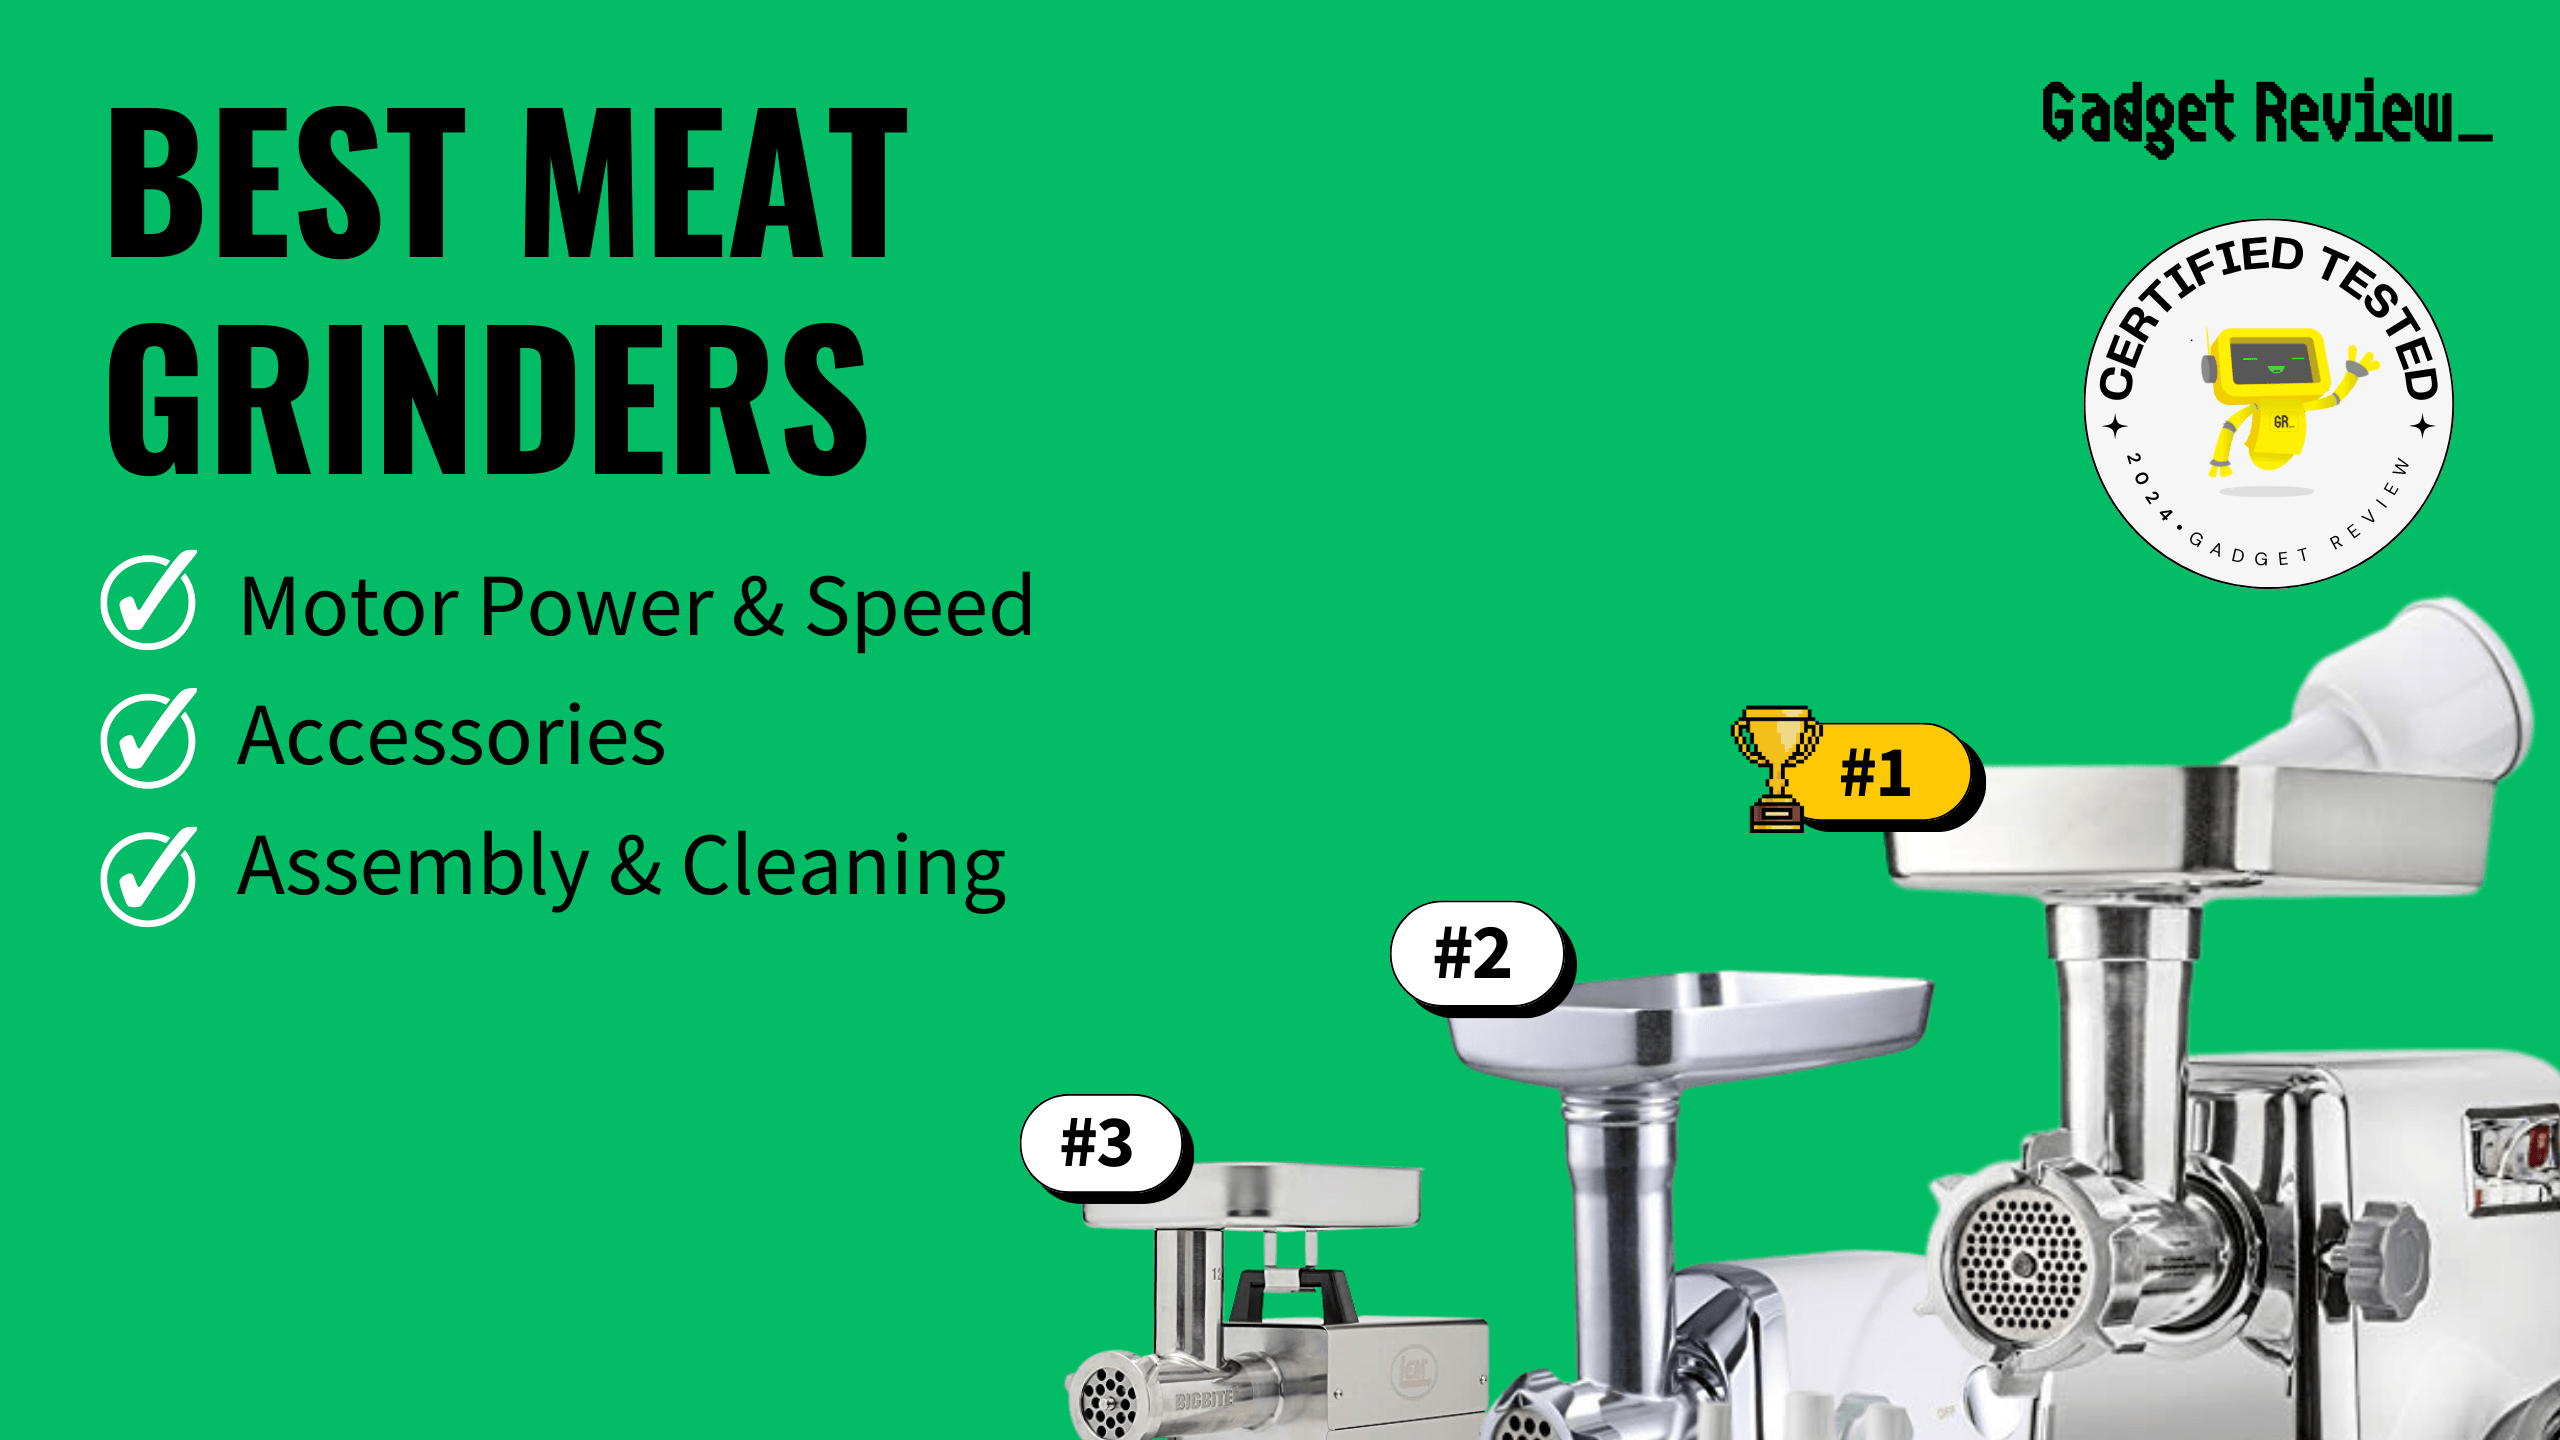 7 of the Best Meat Grinders